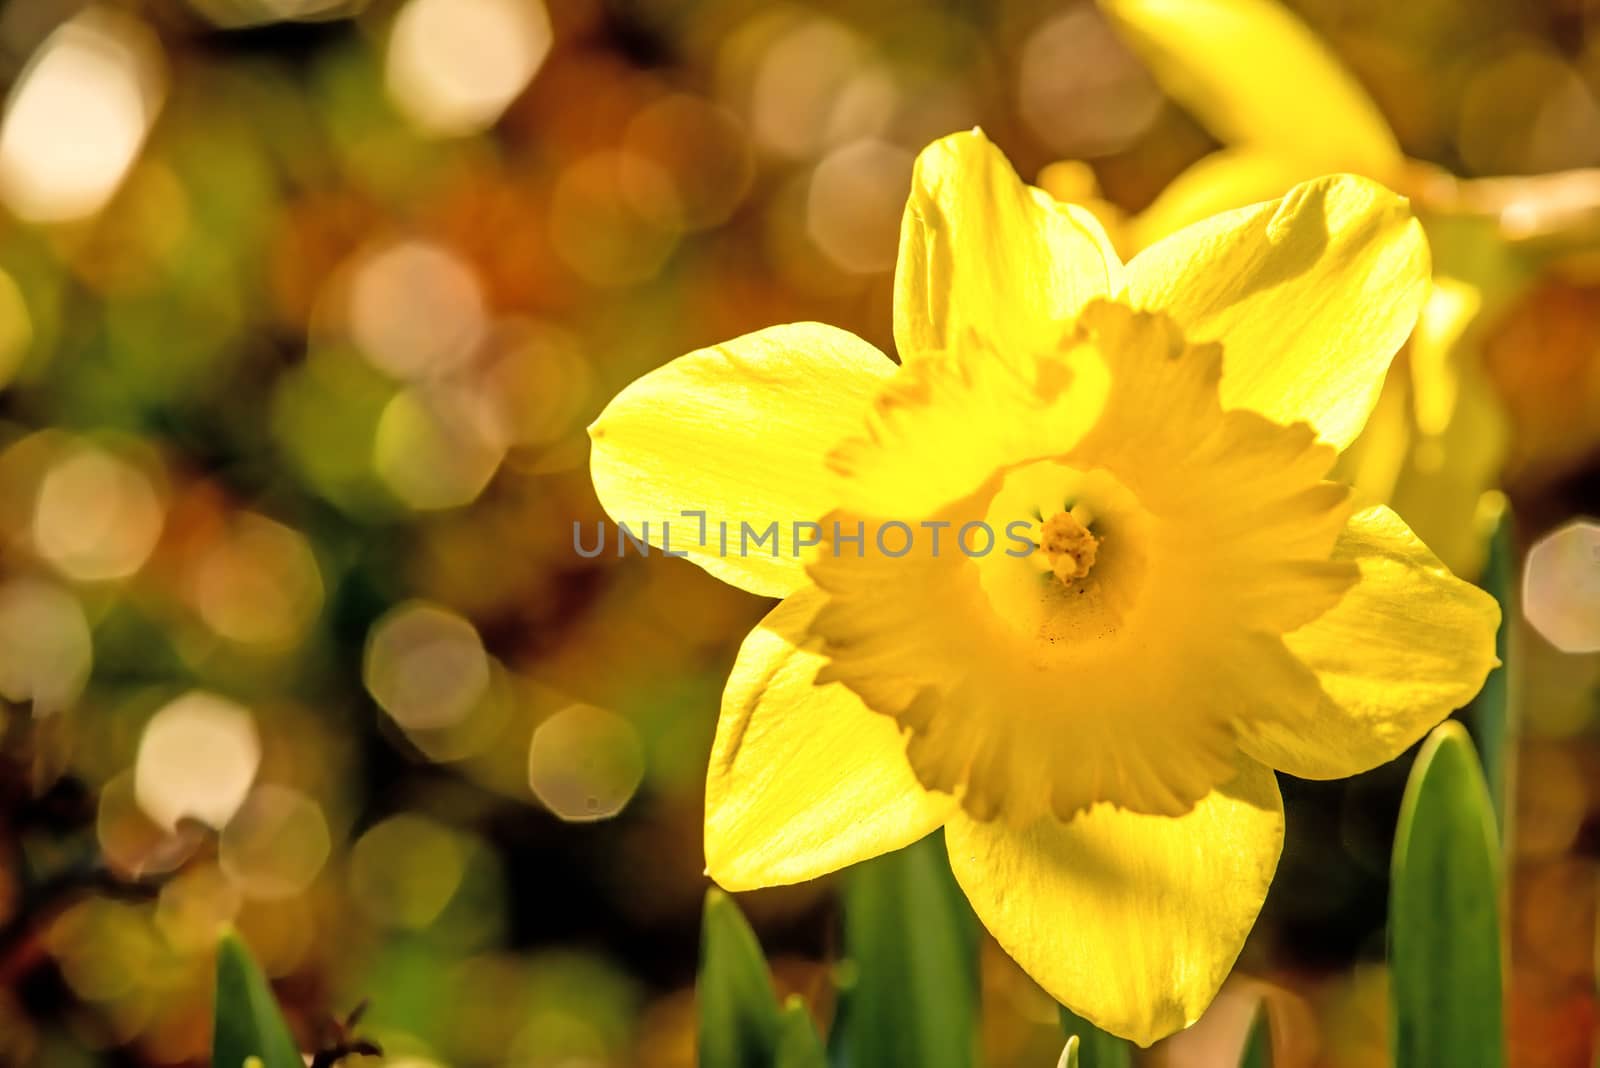 daffodil flower with blurred background